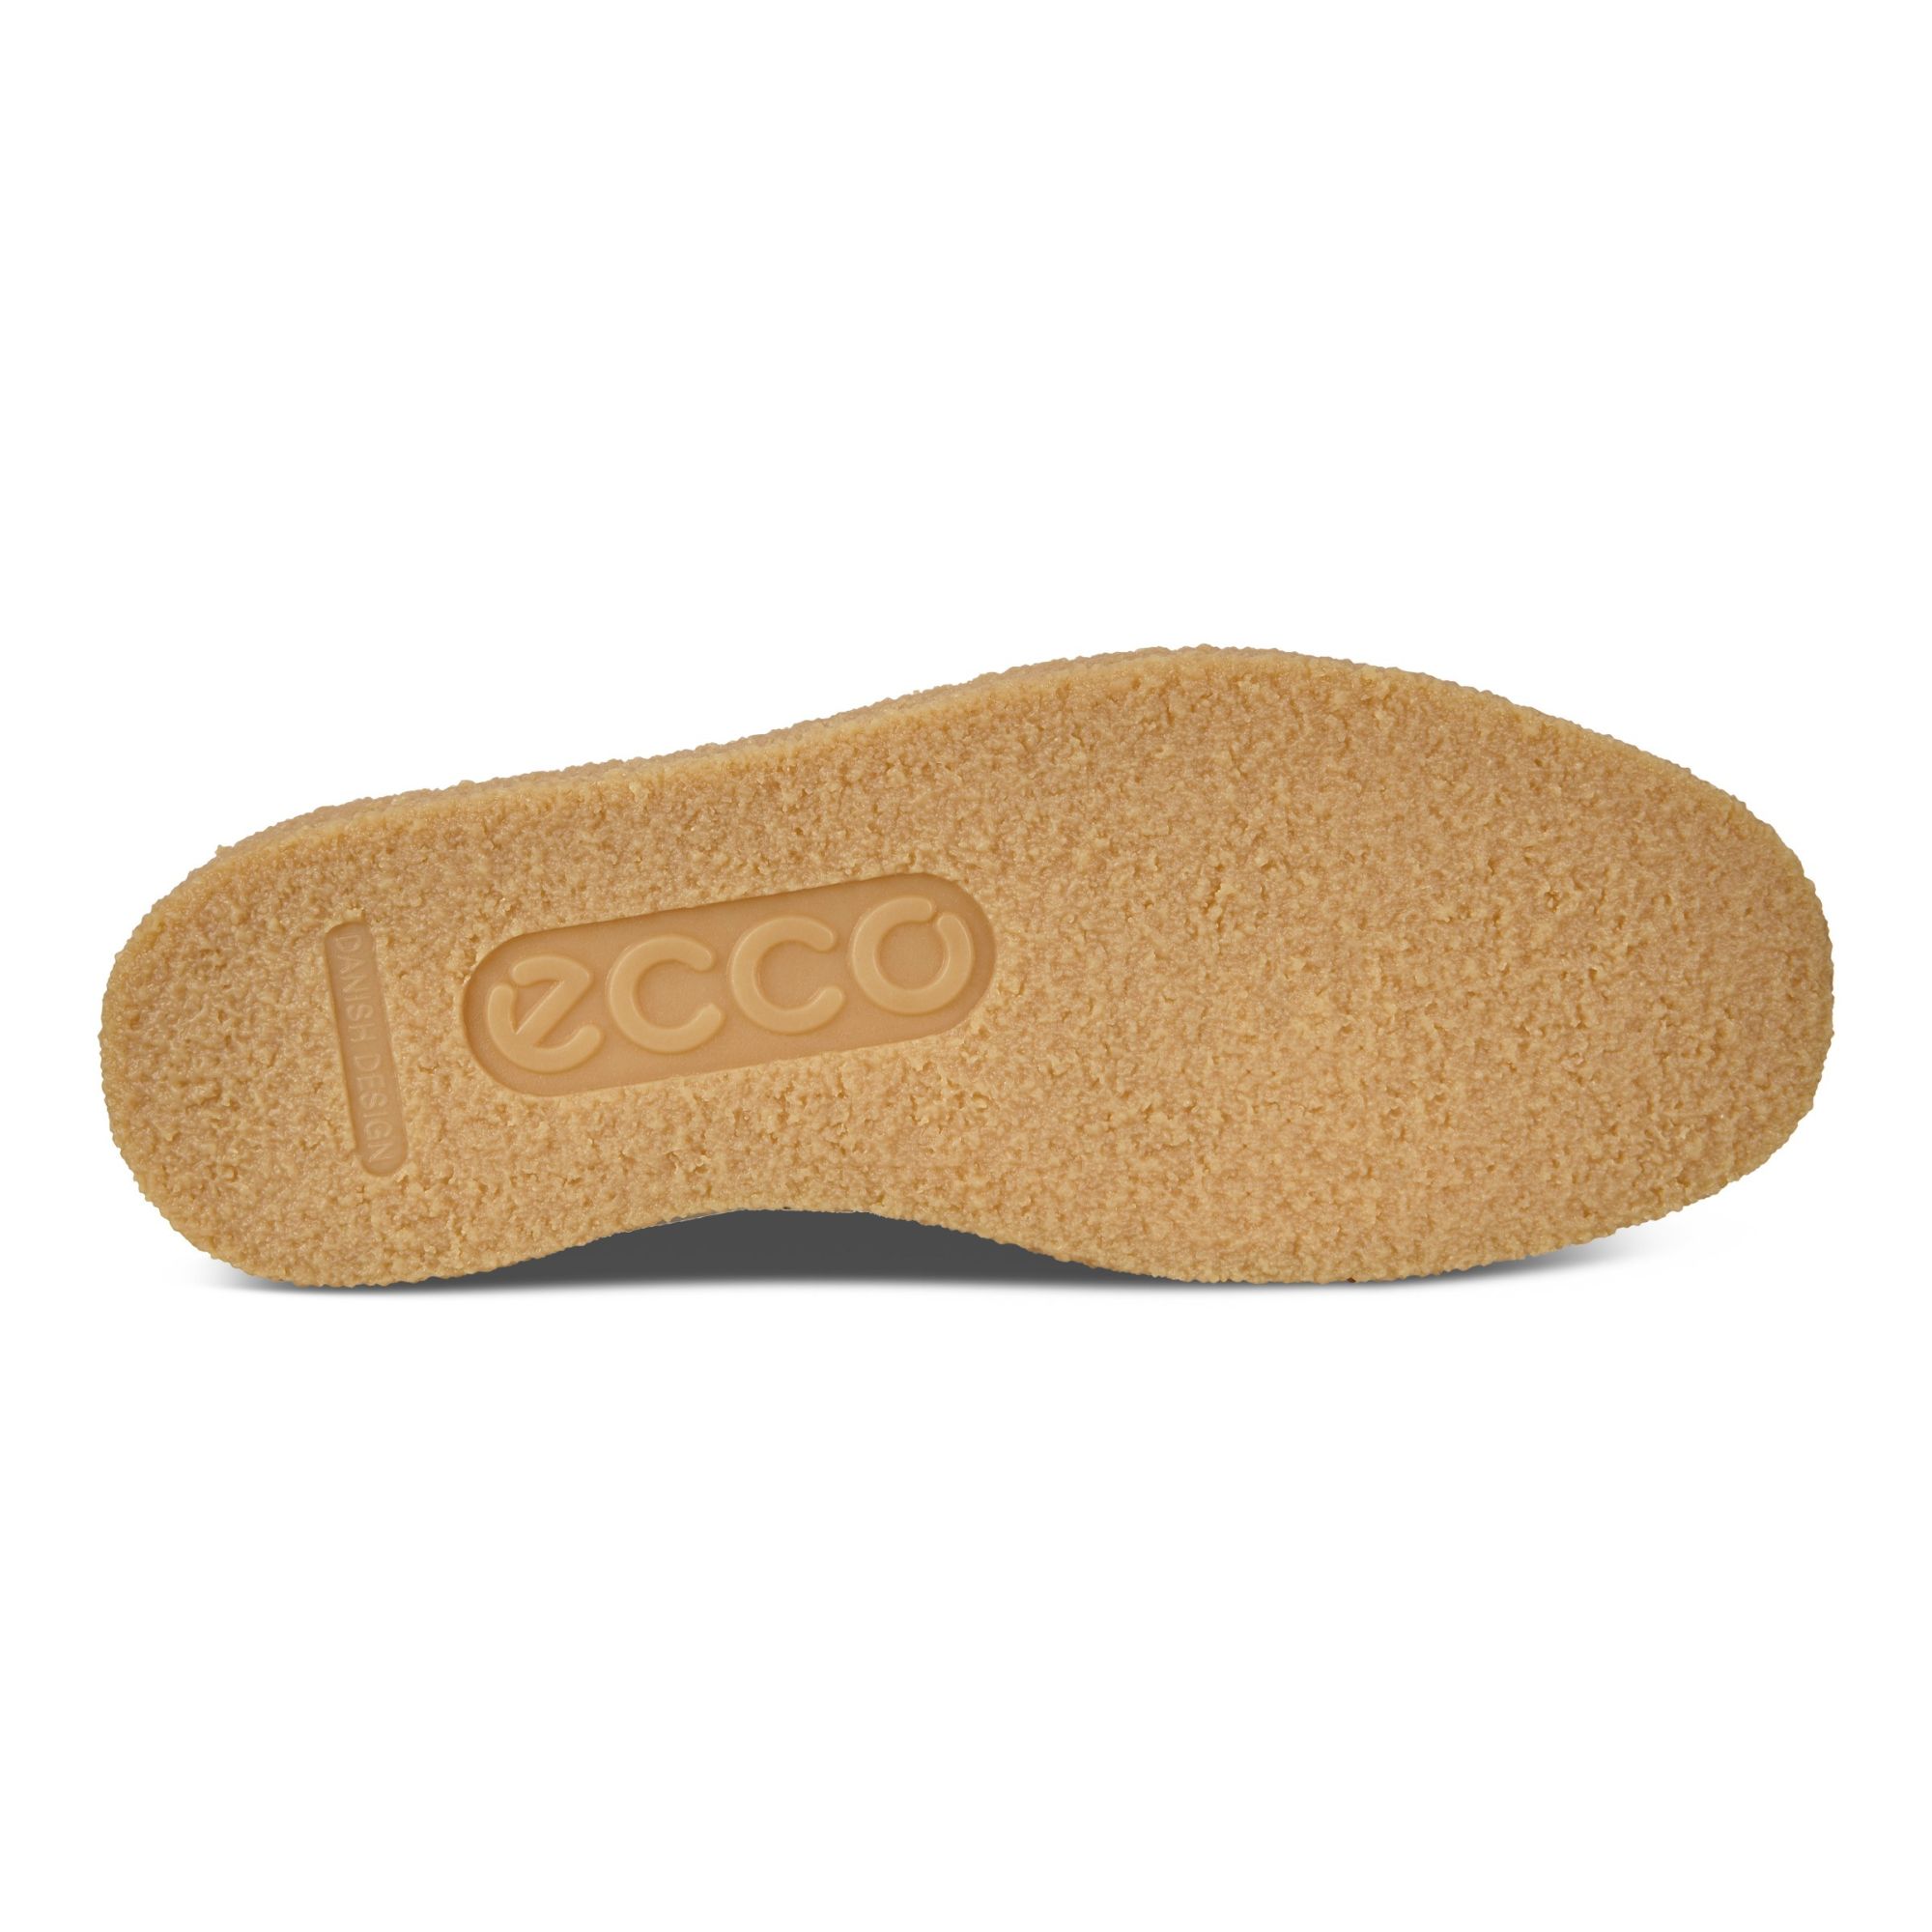 Ecco Womens Crepetray Tie    Products   Veryk Mall   Veryk